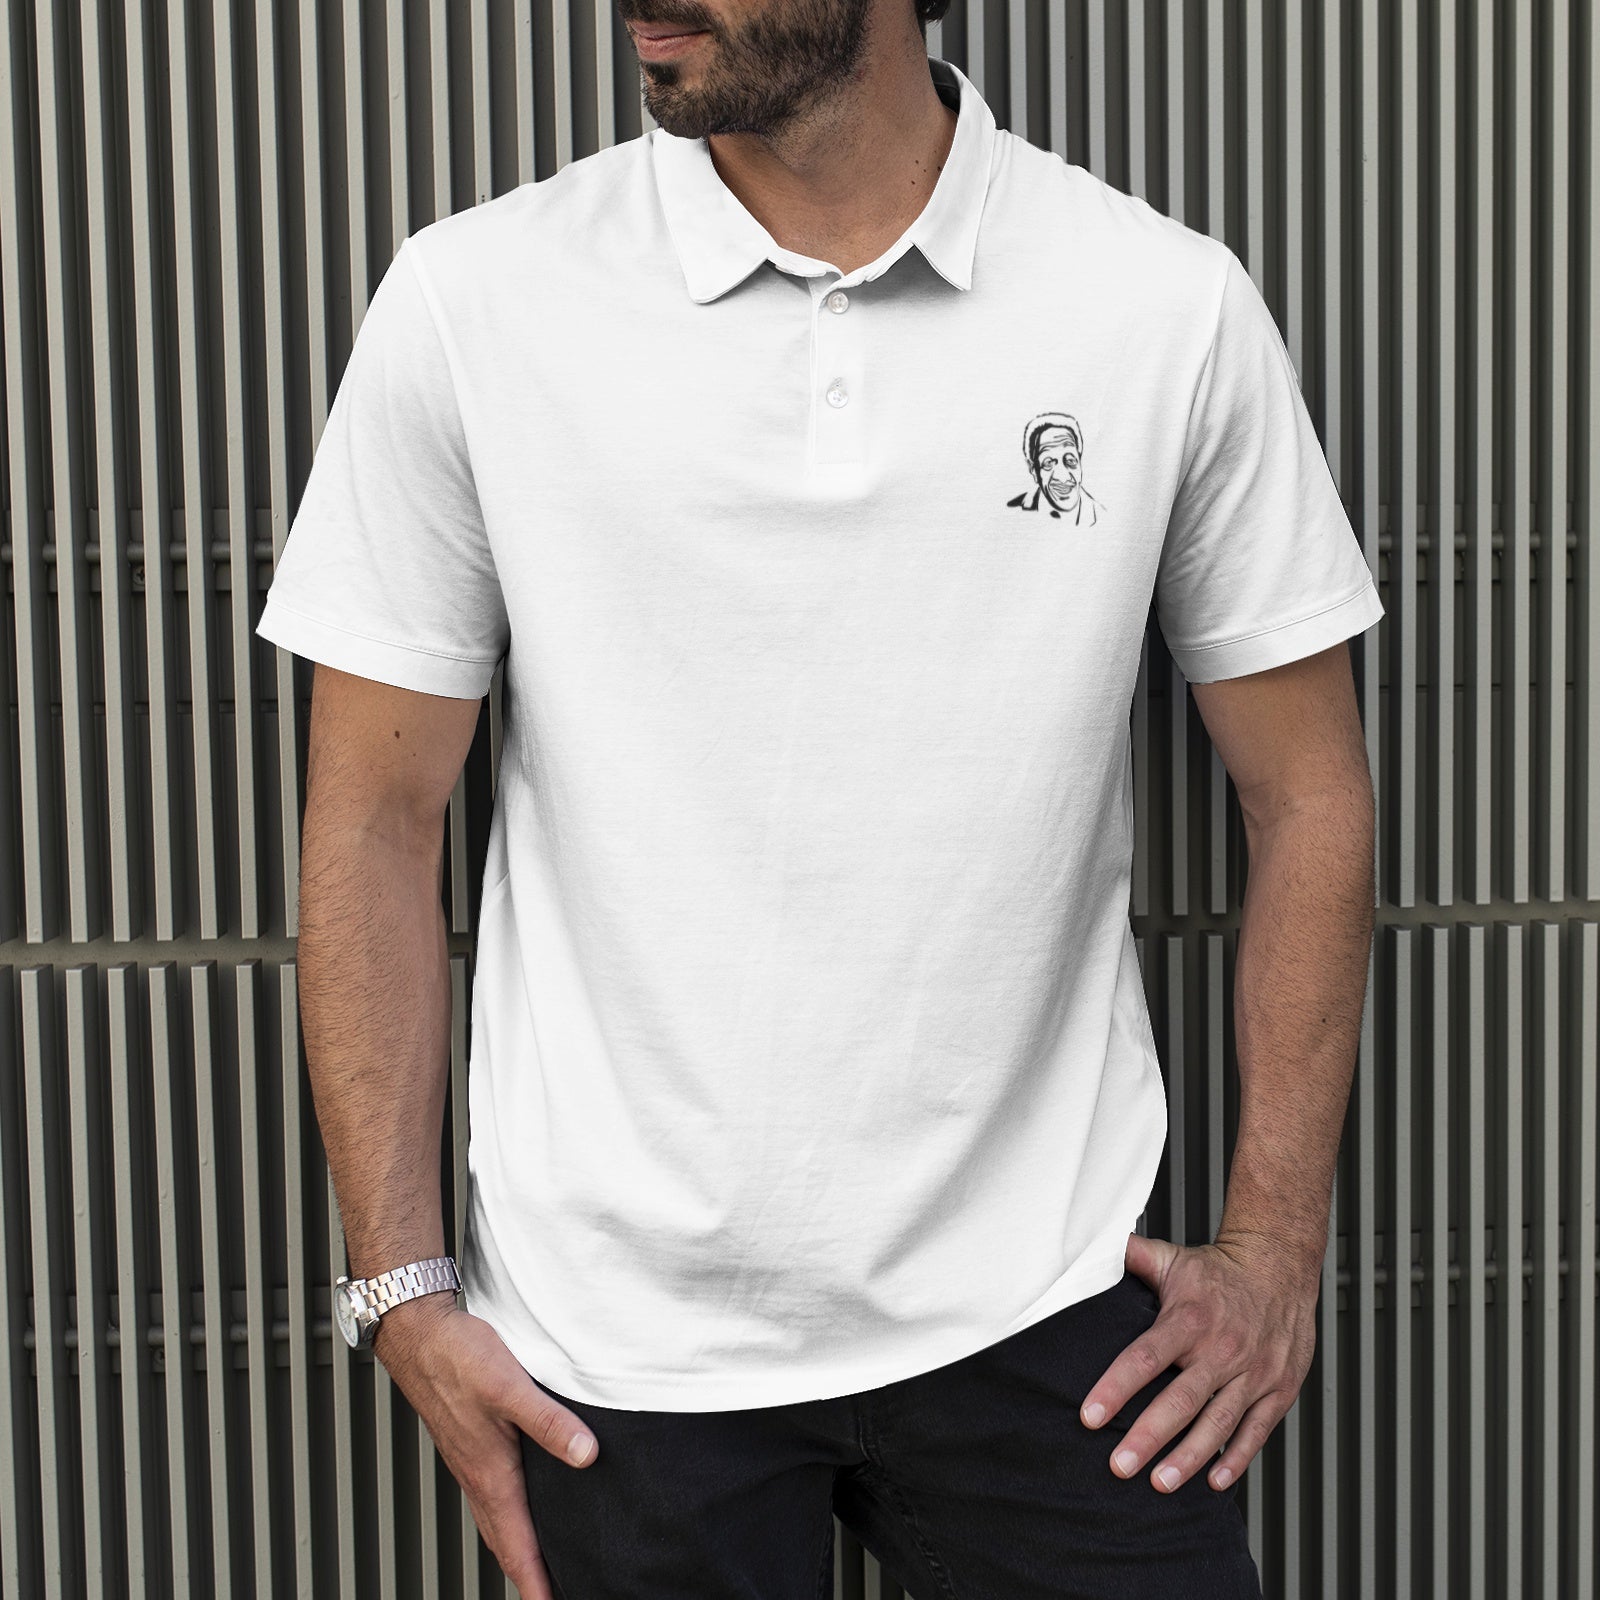 Men's All-Over Print Polo Shirts